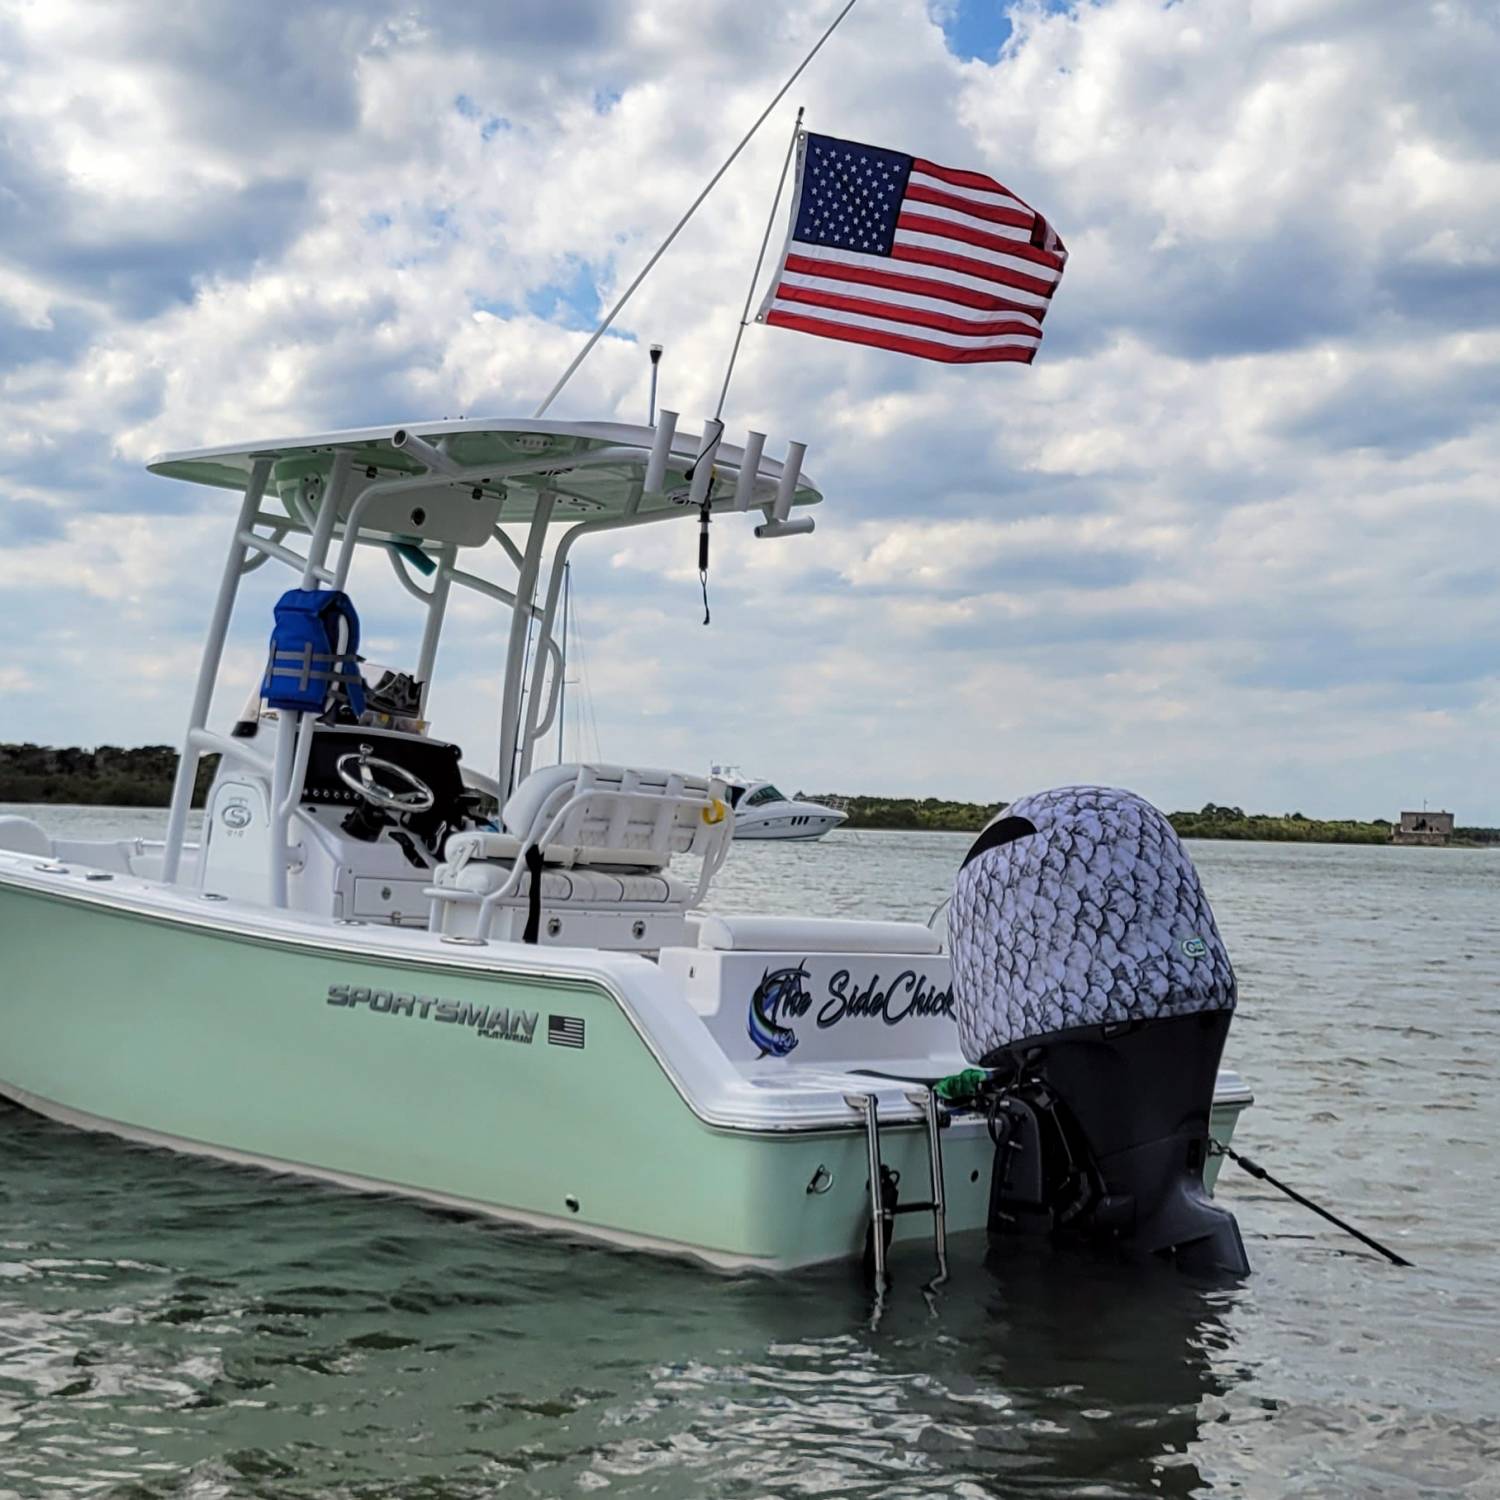 Our 2021 Open 212 Platinum anchored at the sandbar flying the flag proudly. Enjoying some much...